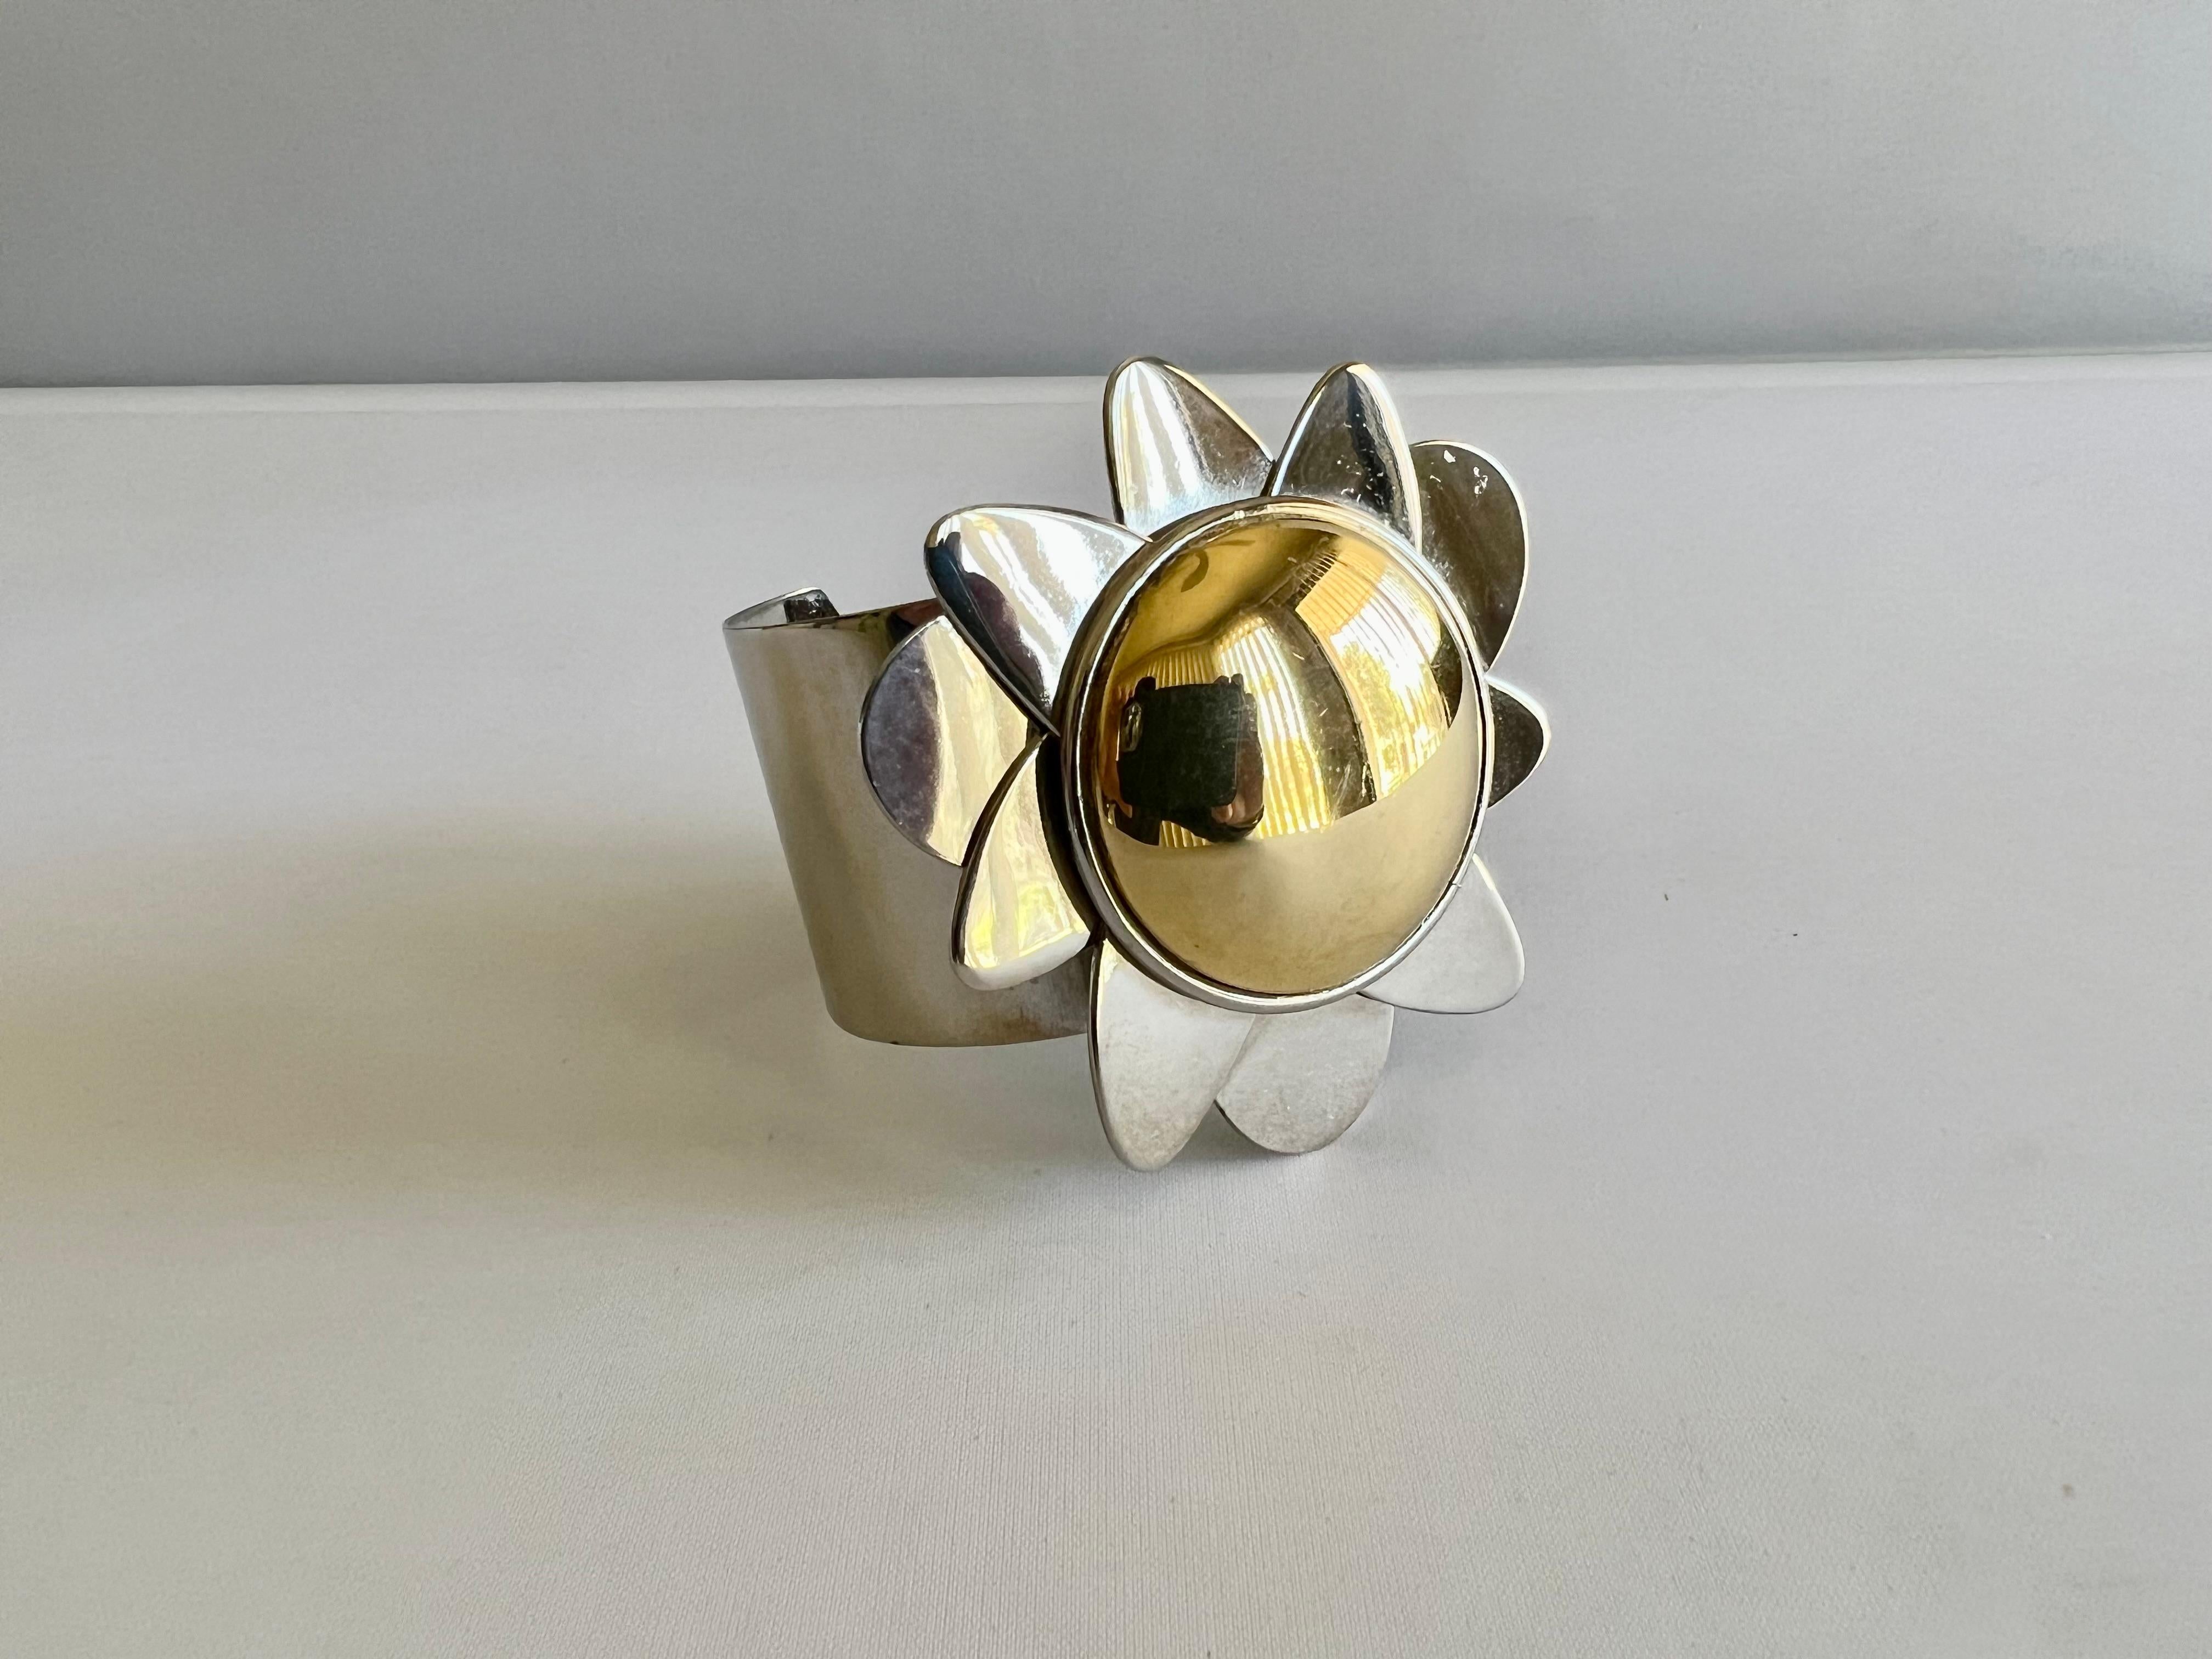 Vintage Givenchy Paris mixed metal mod flower cuff bracelet - signed Givenchy made in Paris circa 1960-70. Cuff opening measures 2.25